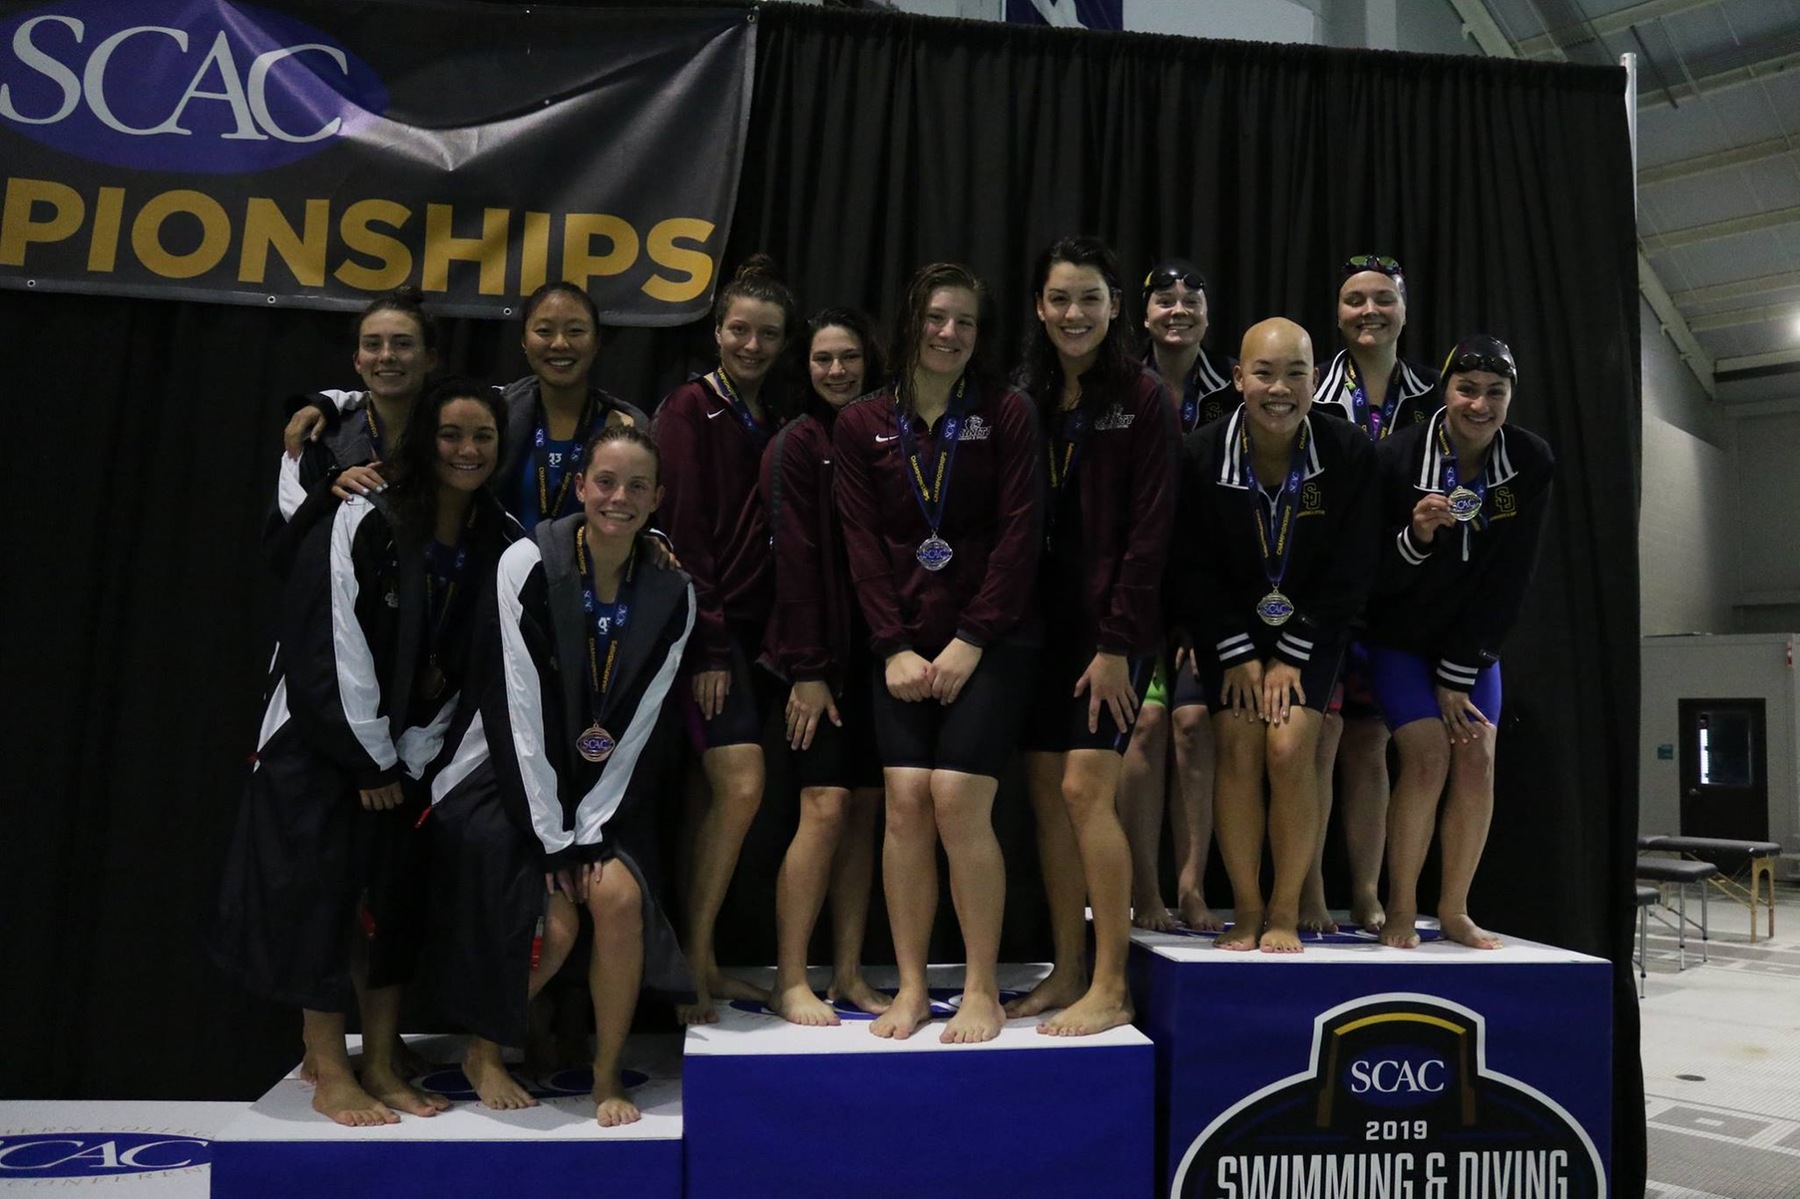 Women's Swimming Takes Gold in First Event of SCAC Championship Meet